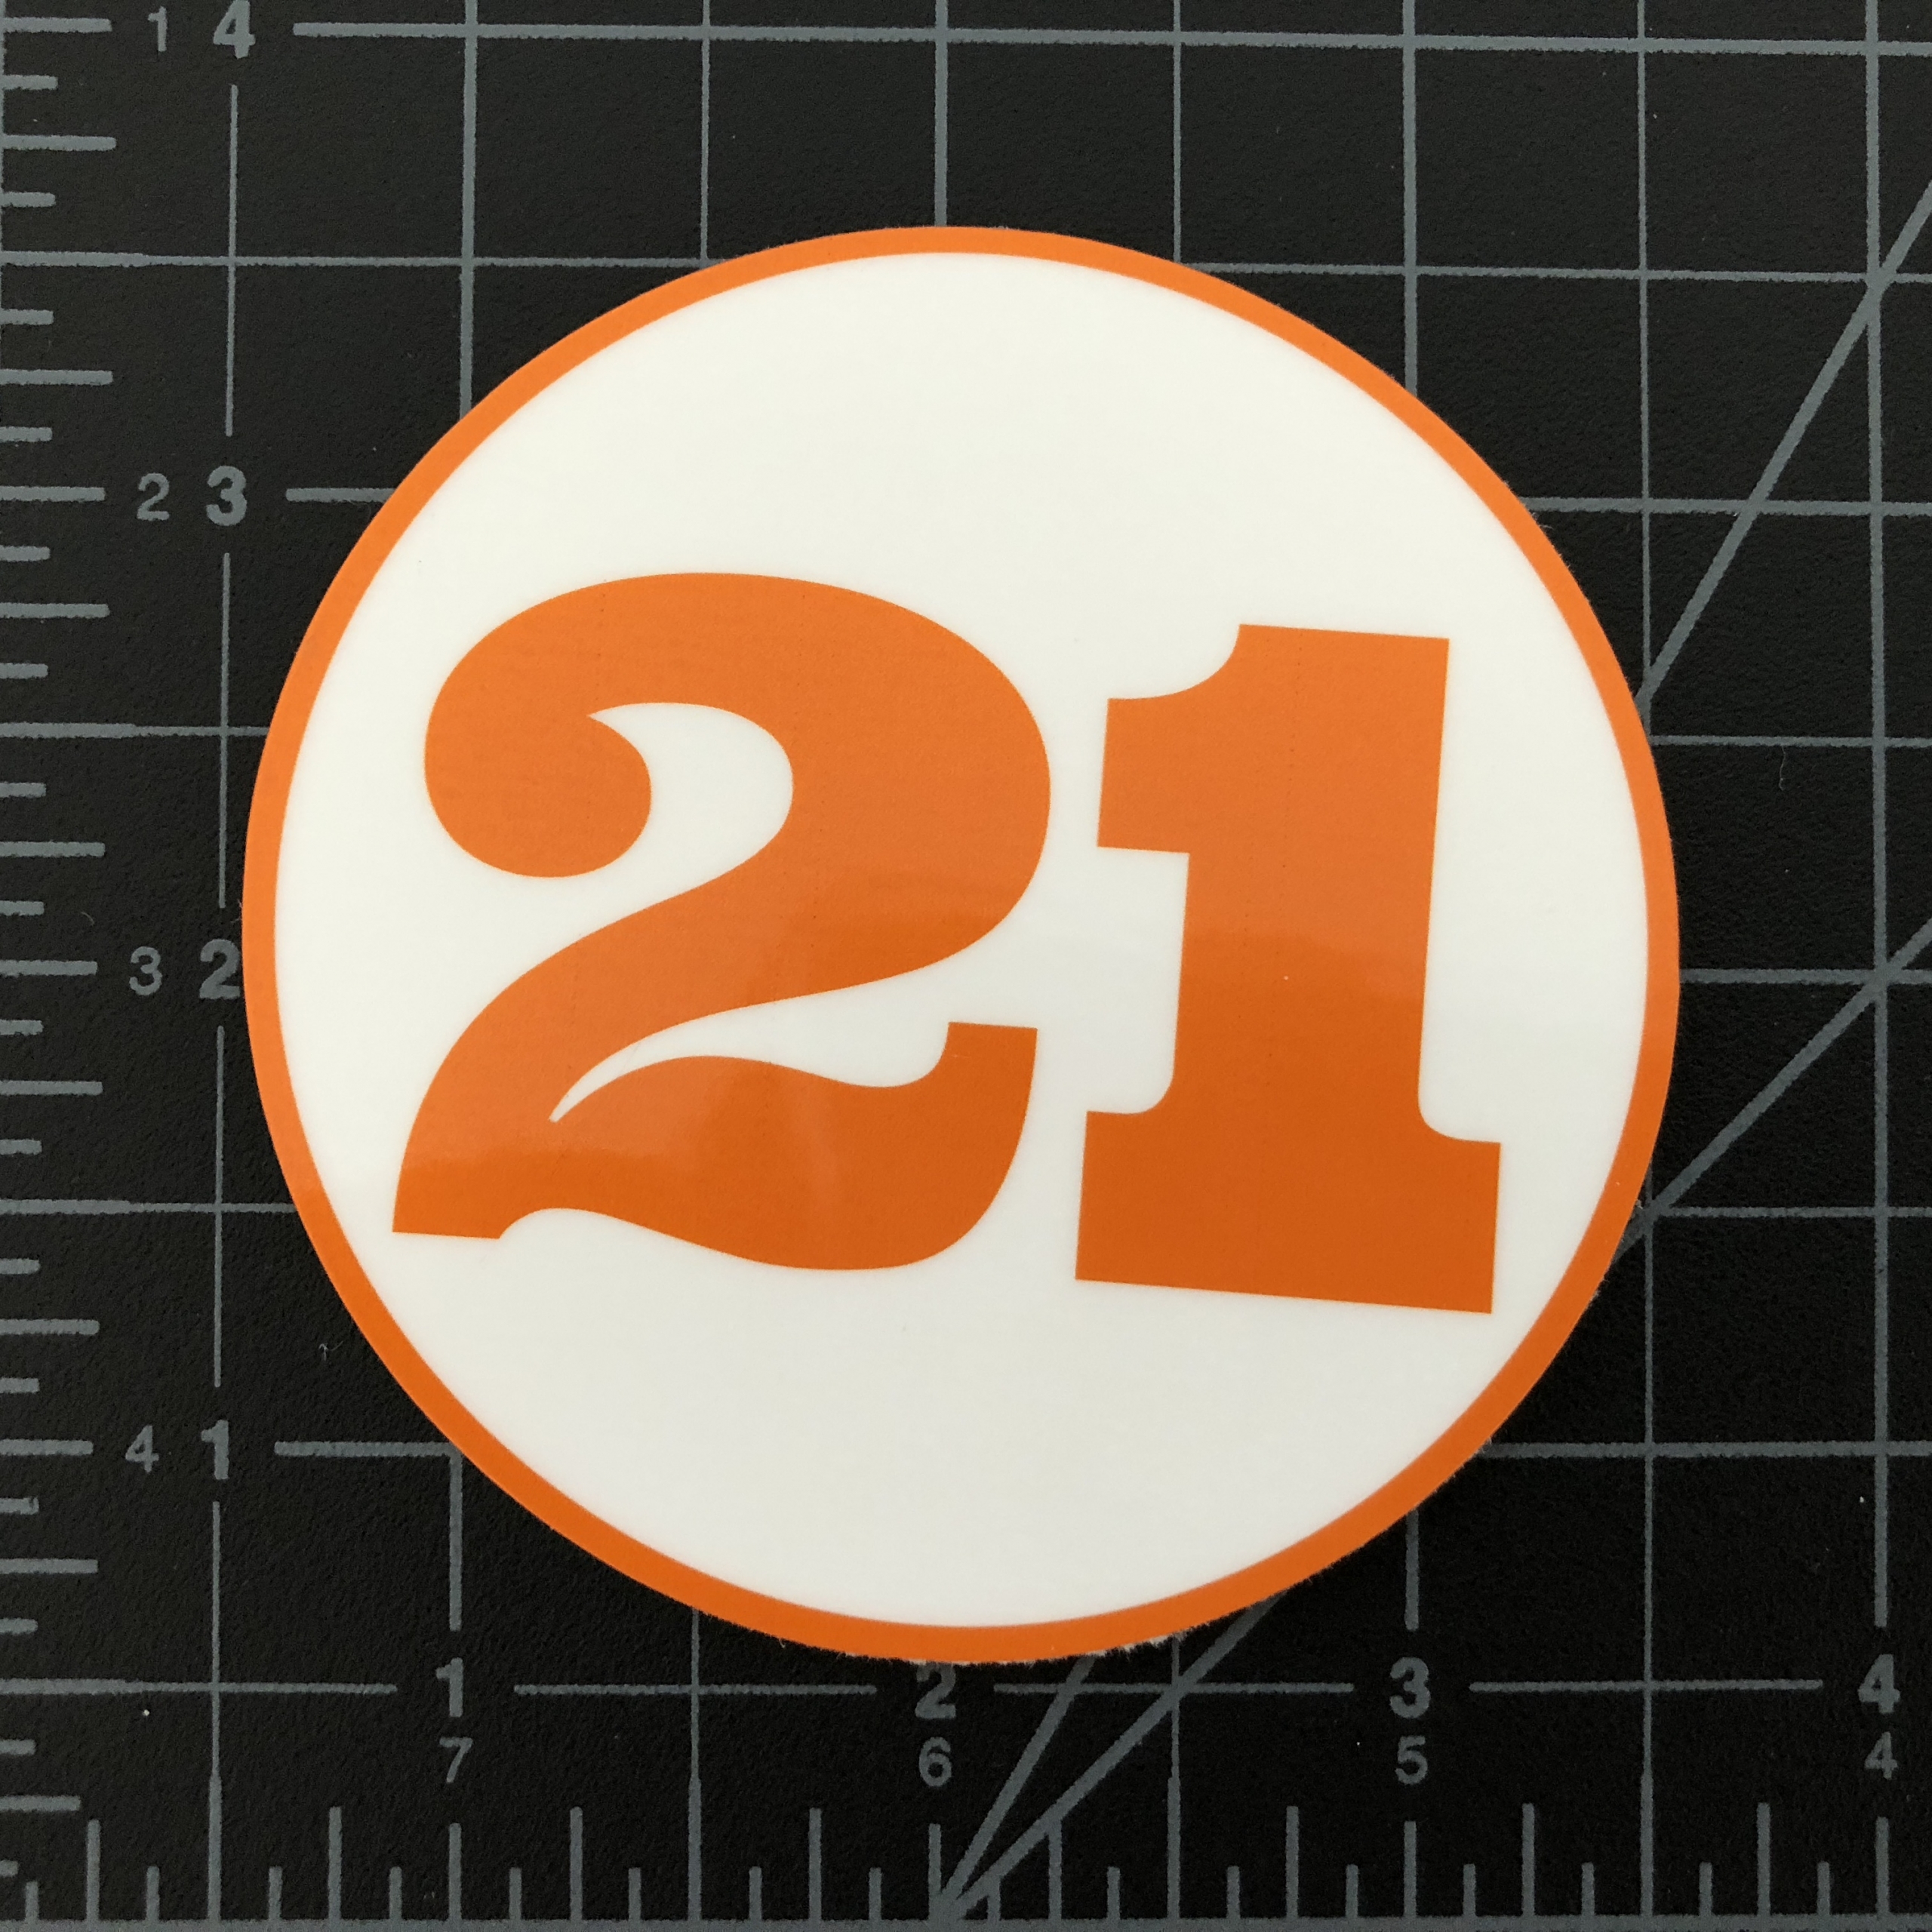 Custom Number Stickers - Die Cut - RC SWAG - Stickers, T-Shirts, Hoodies,  RC Kits & More!